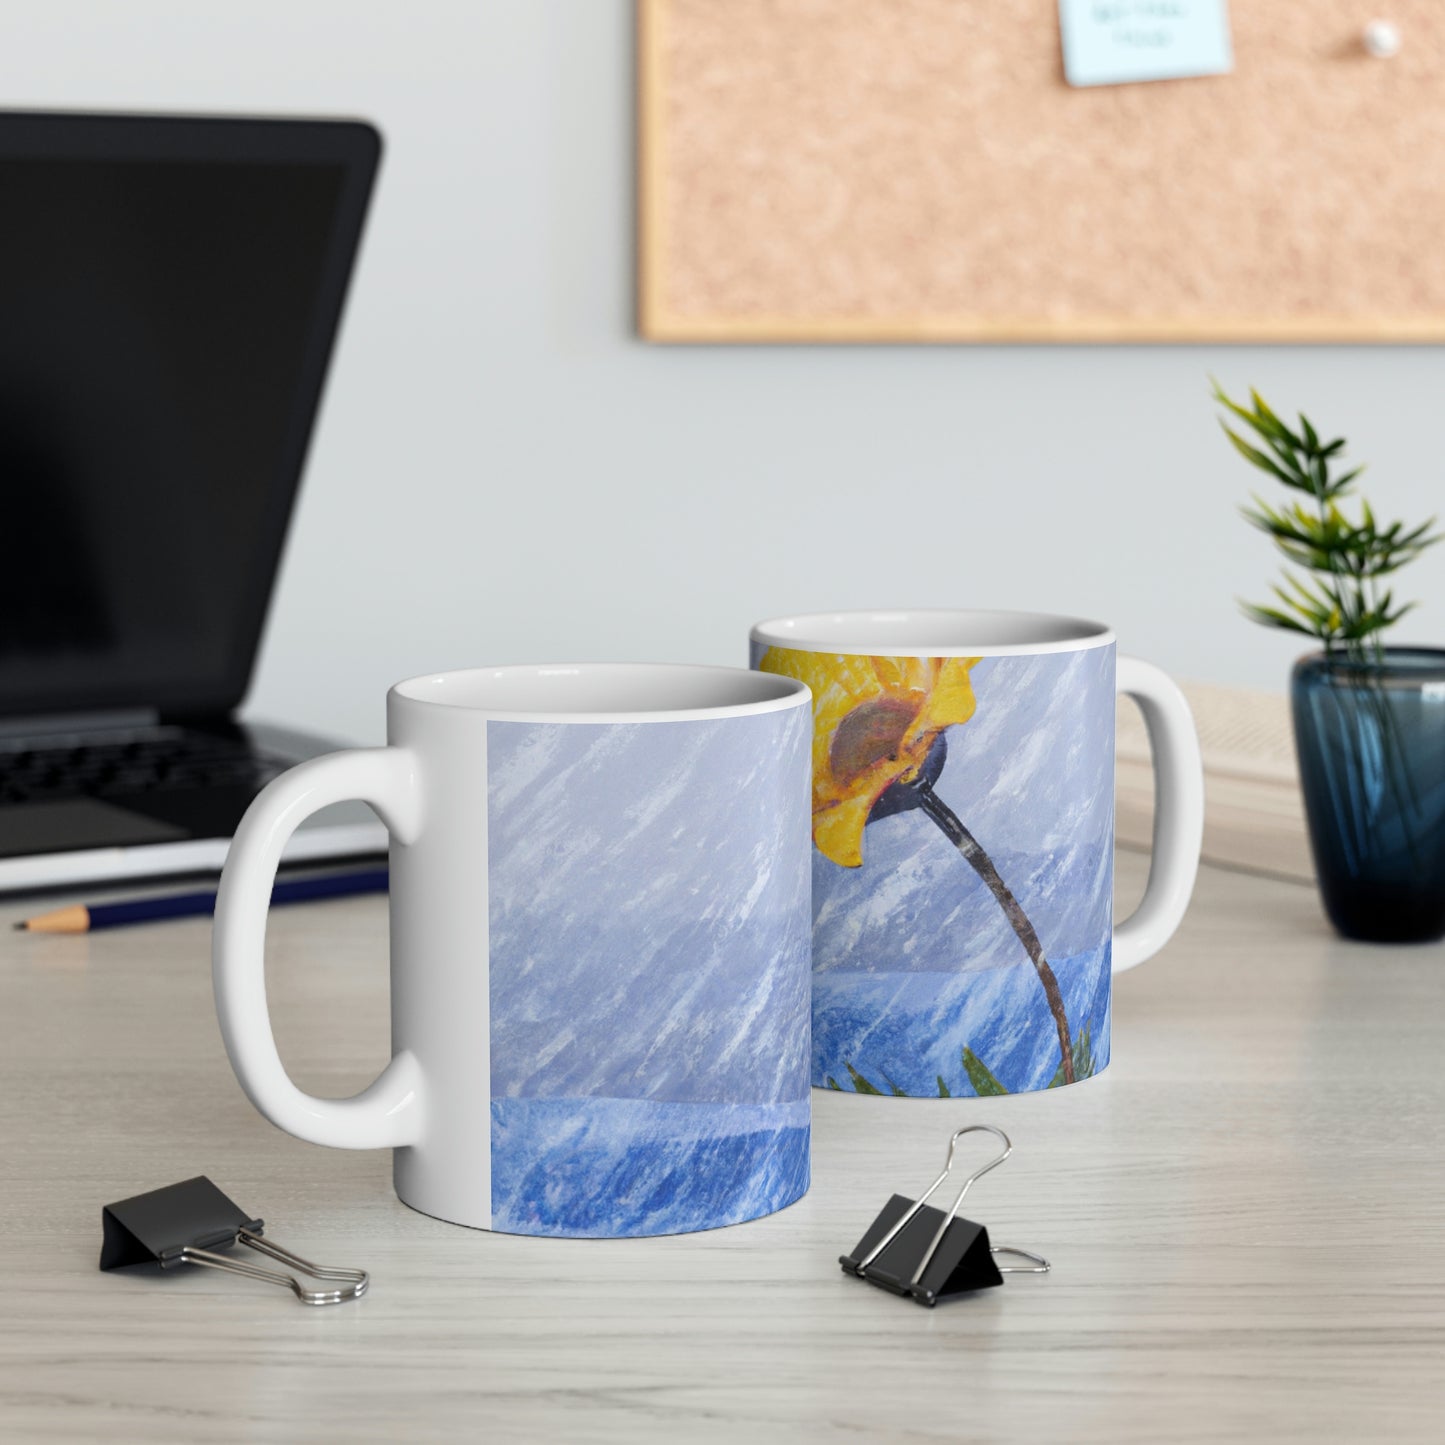 "A Burst of Color in the Glistening White: The Miracle of a Flower Blooms in a Snowstorm" - The Alien Ceramic Mug 11 oz